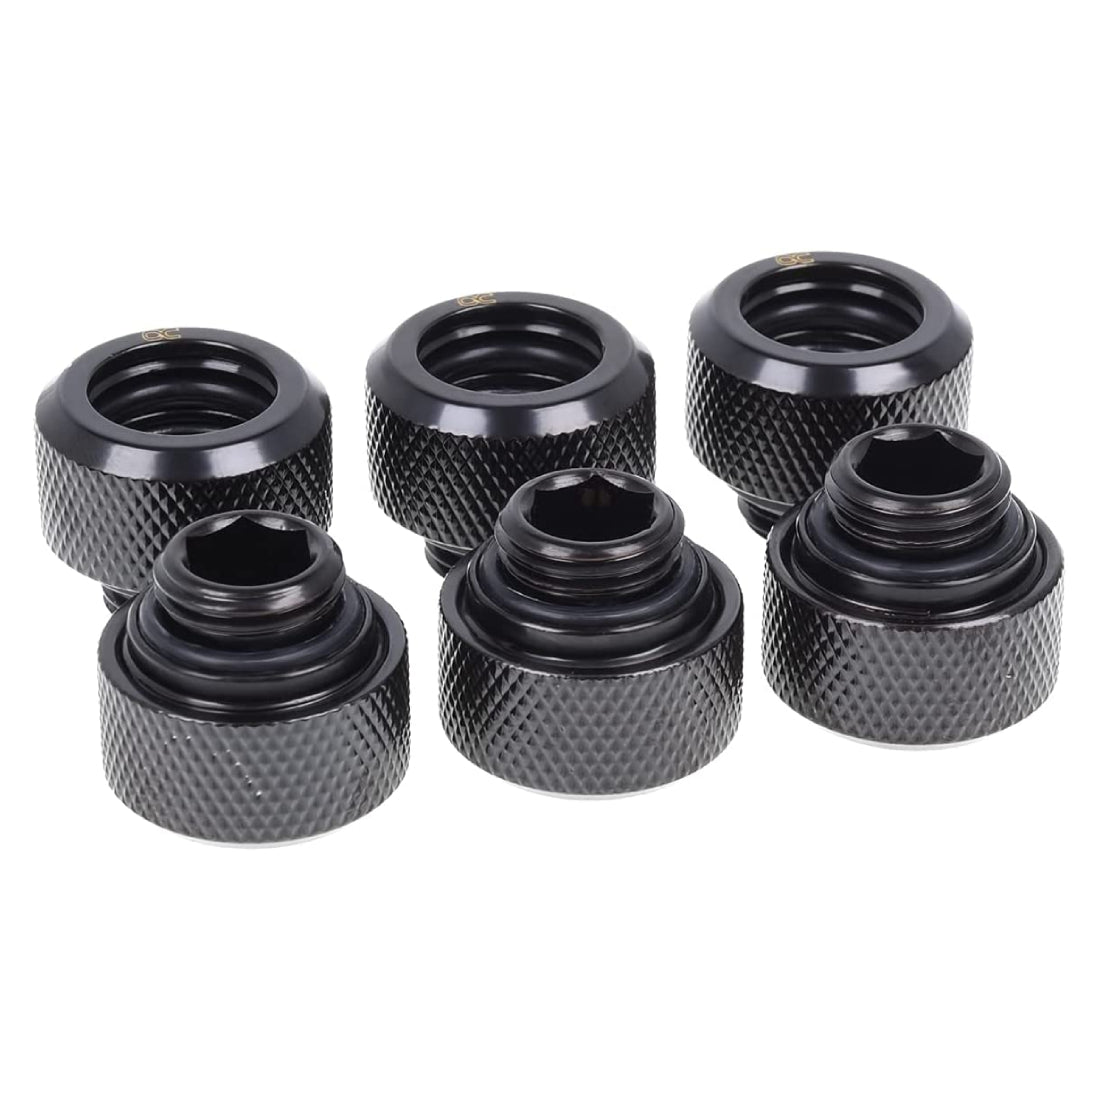 Alphacool Eiszapfen 13mm HardTube compression fitting G1/4 - knurled - Deep Black - Store 974 | ستور ٩٧٤